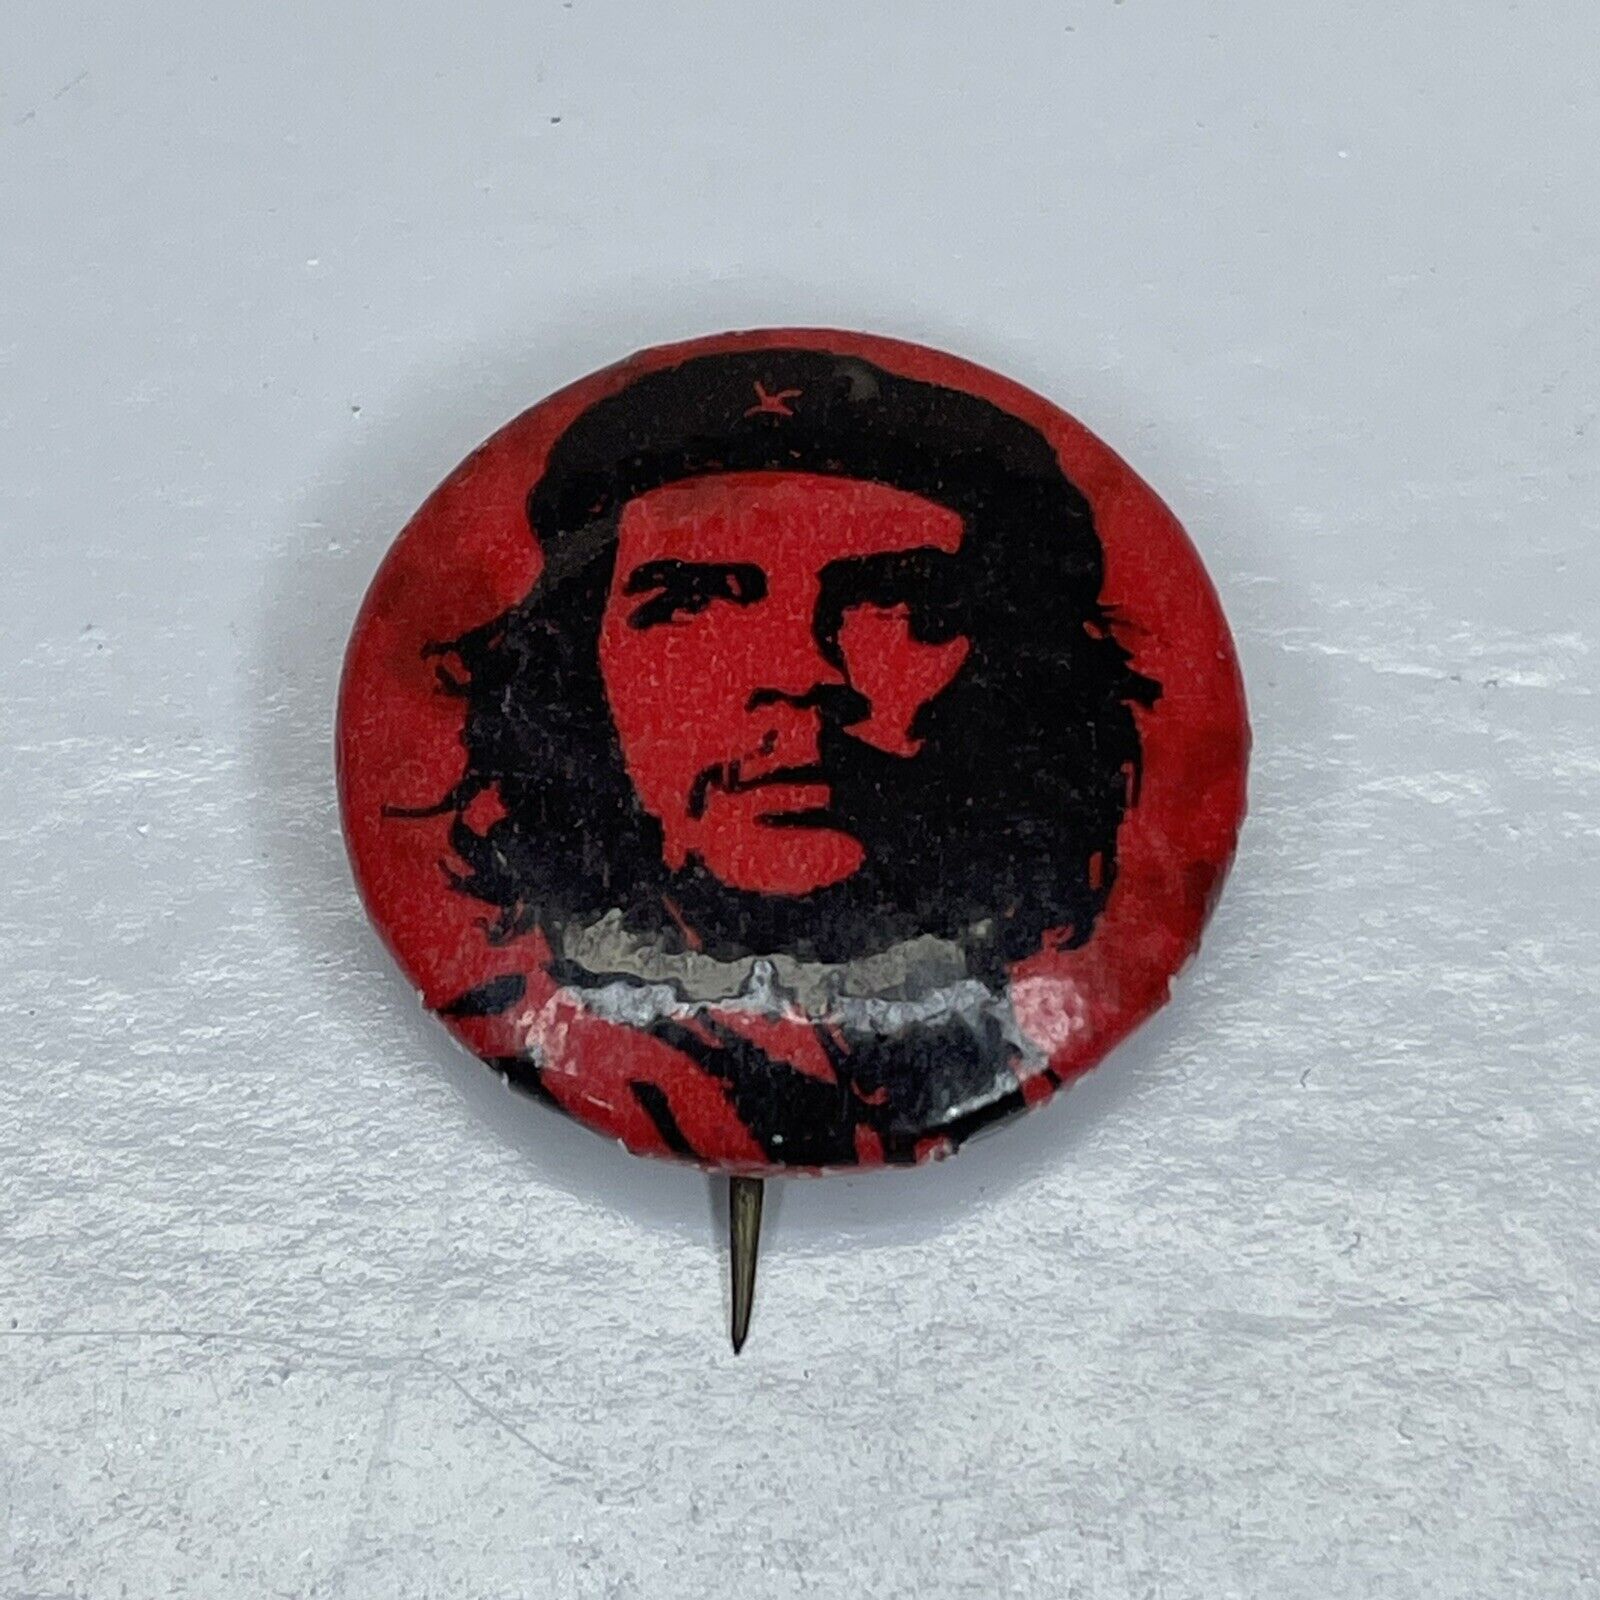 (1) Che Guevara Vintage 1960s? 1970s? Pinback Button Pin Iconic Image